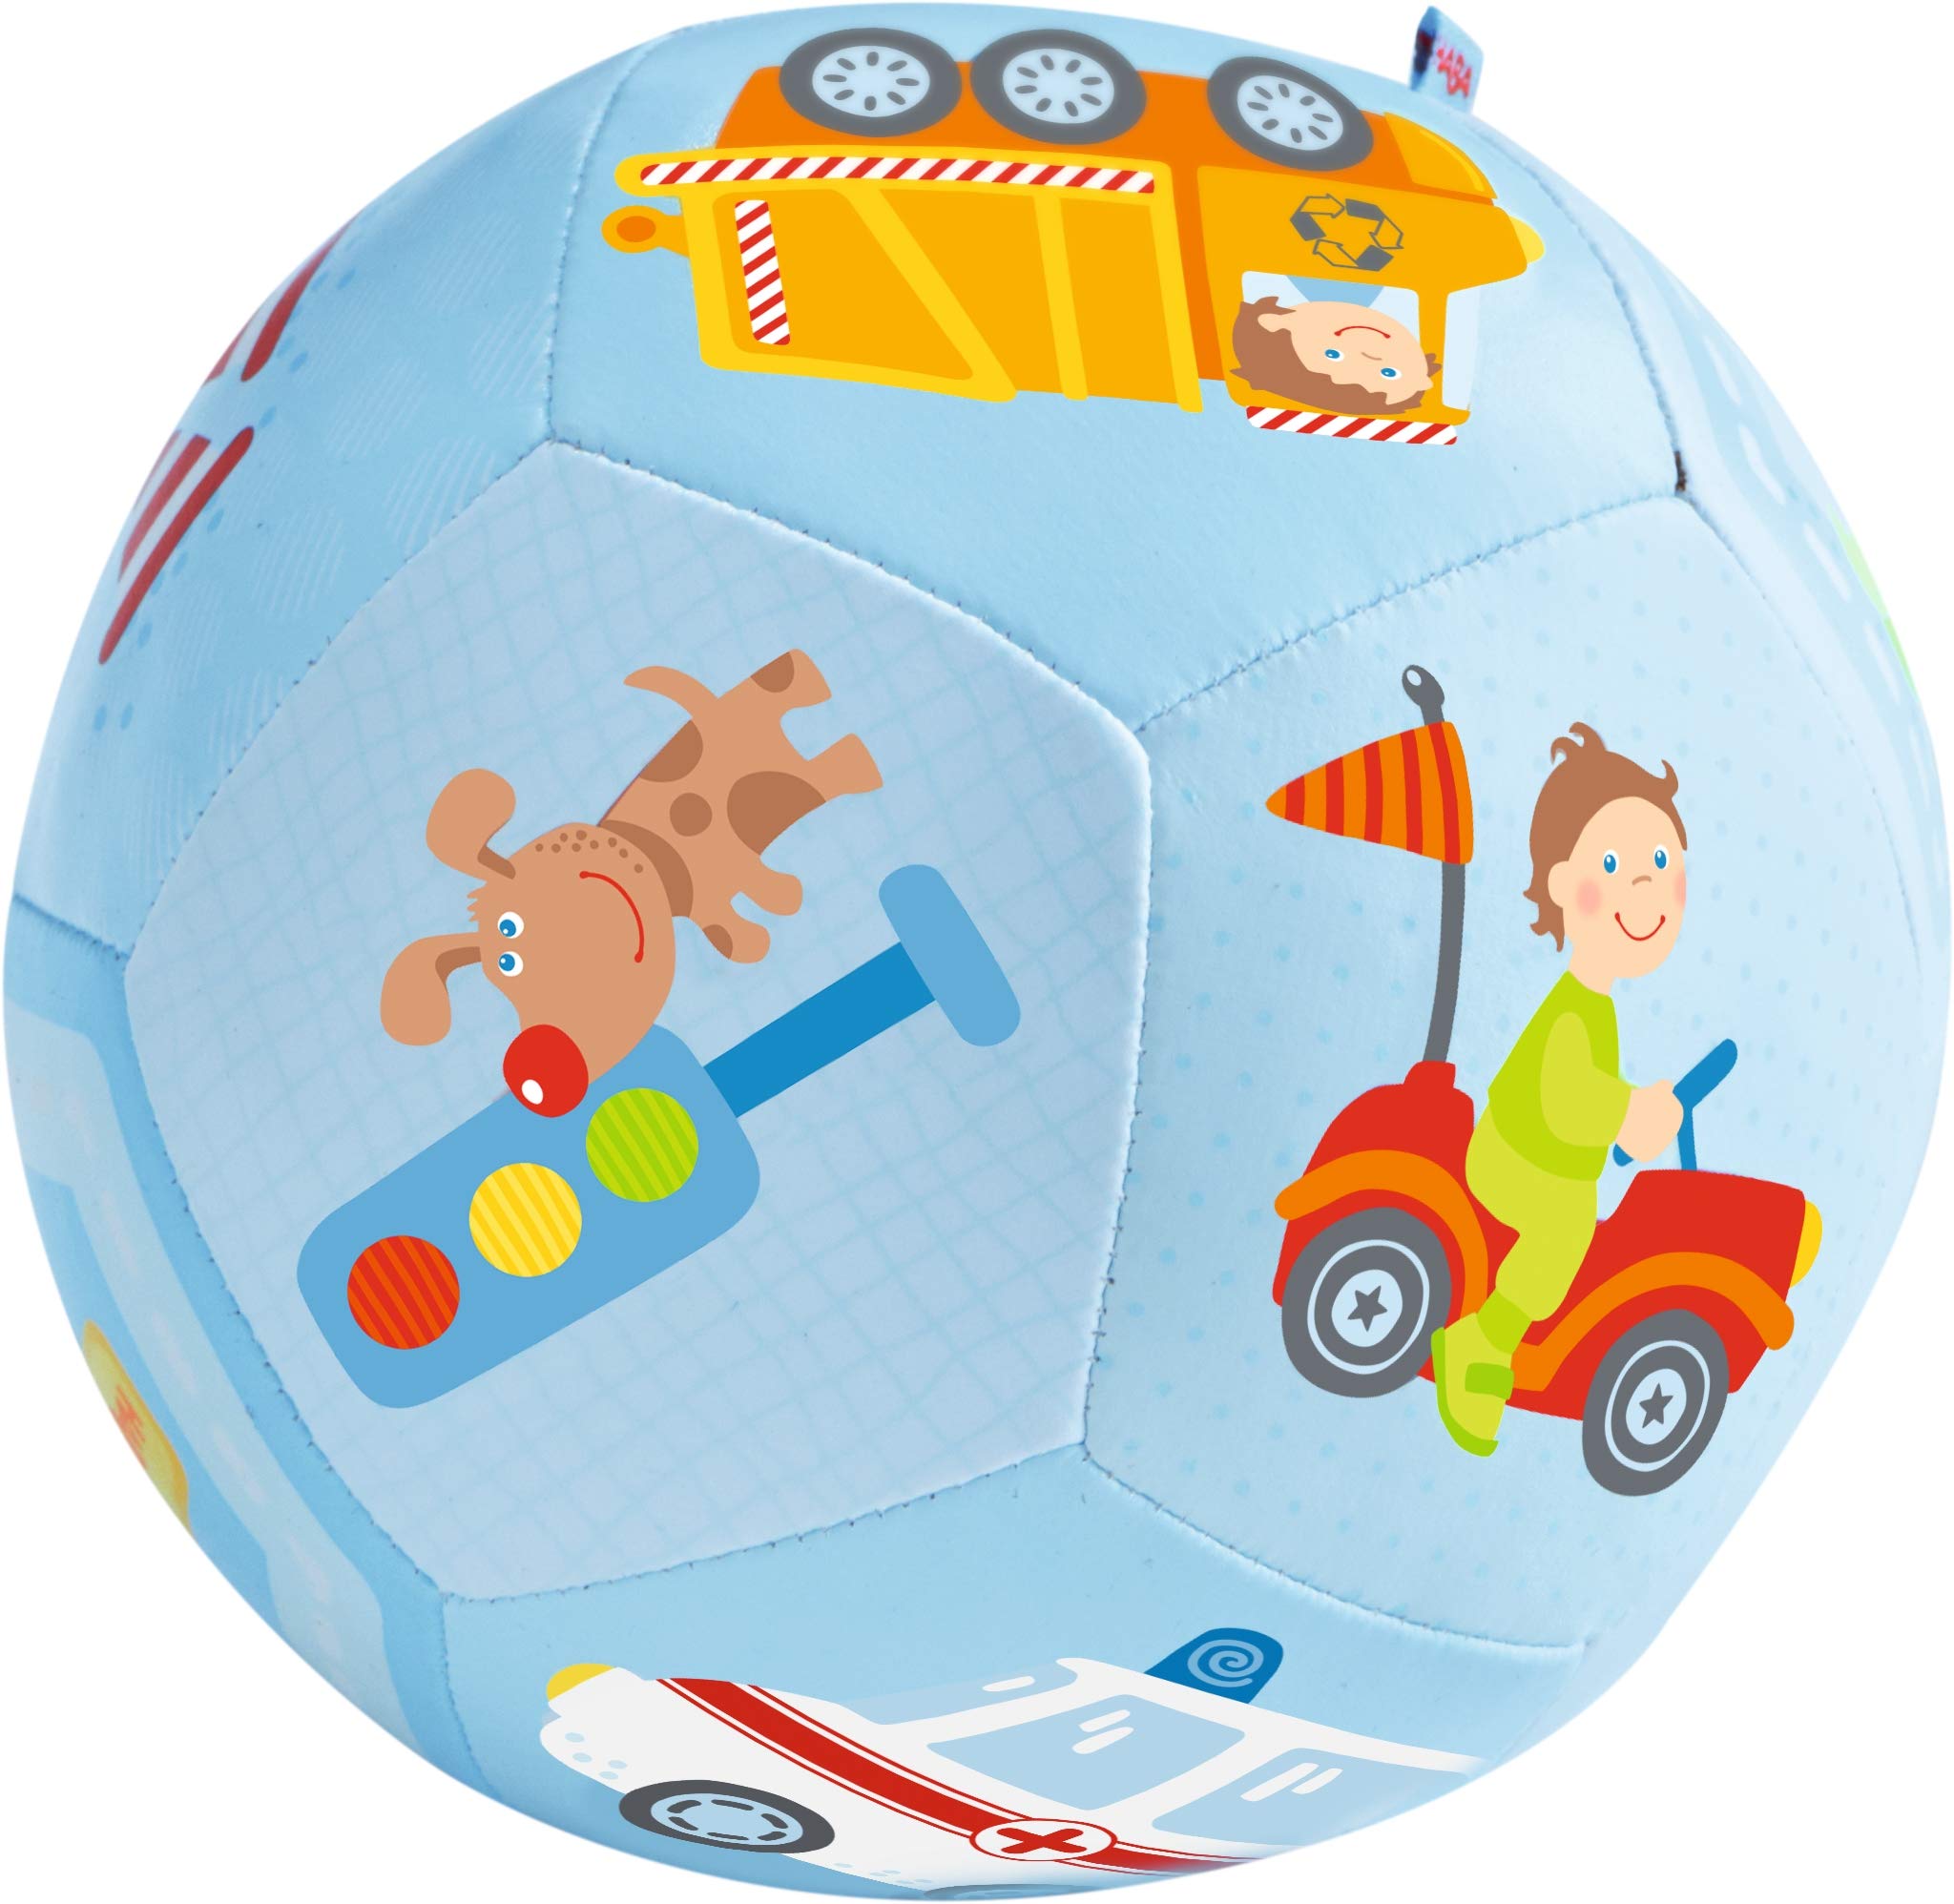 HABA 302482 Baby Ball Vehicle World Soft Toy Ball with Vehicle Motifs Baby Toy from 6 Months